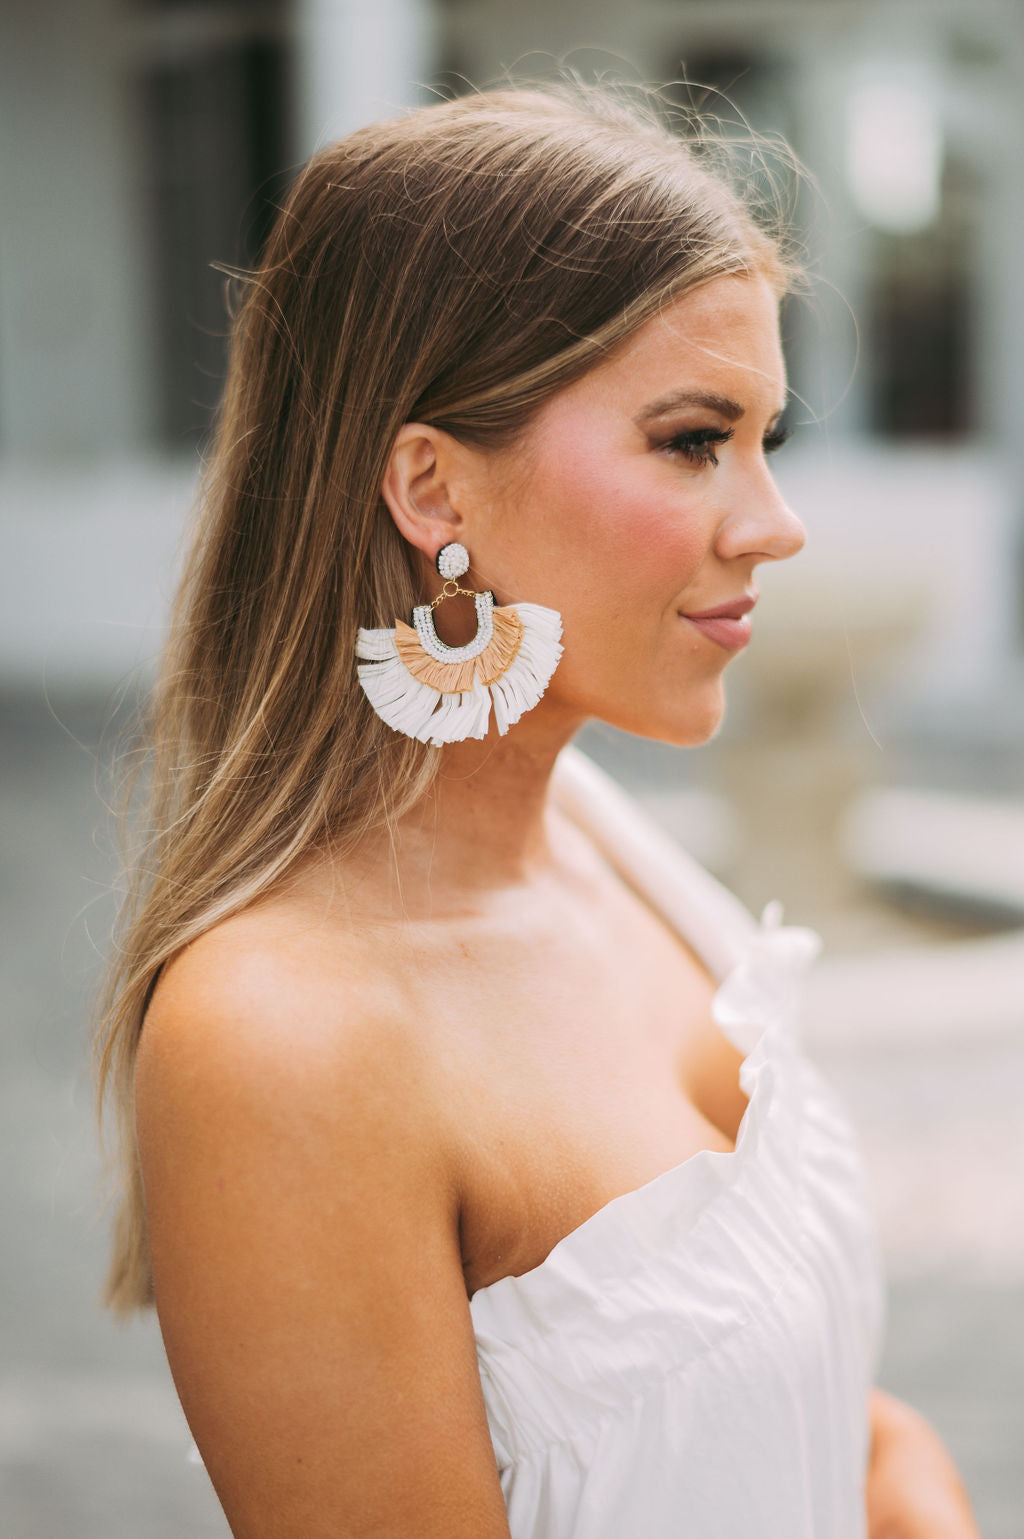 The 20 Best Bridal Earrings of 2023 - Stylish Earrings for Brides